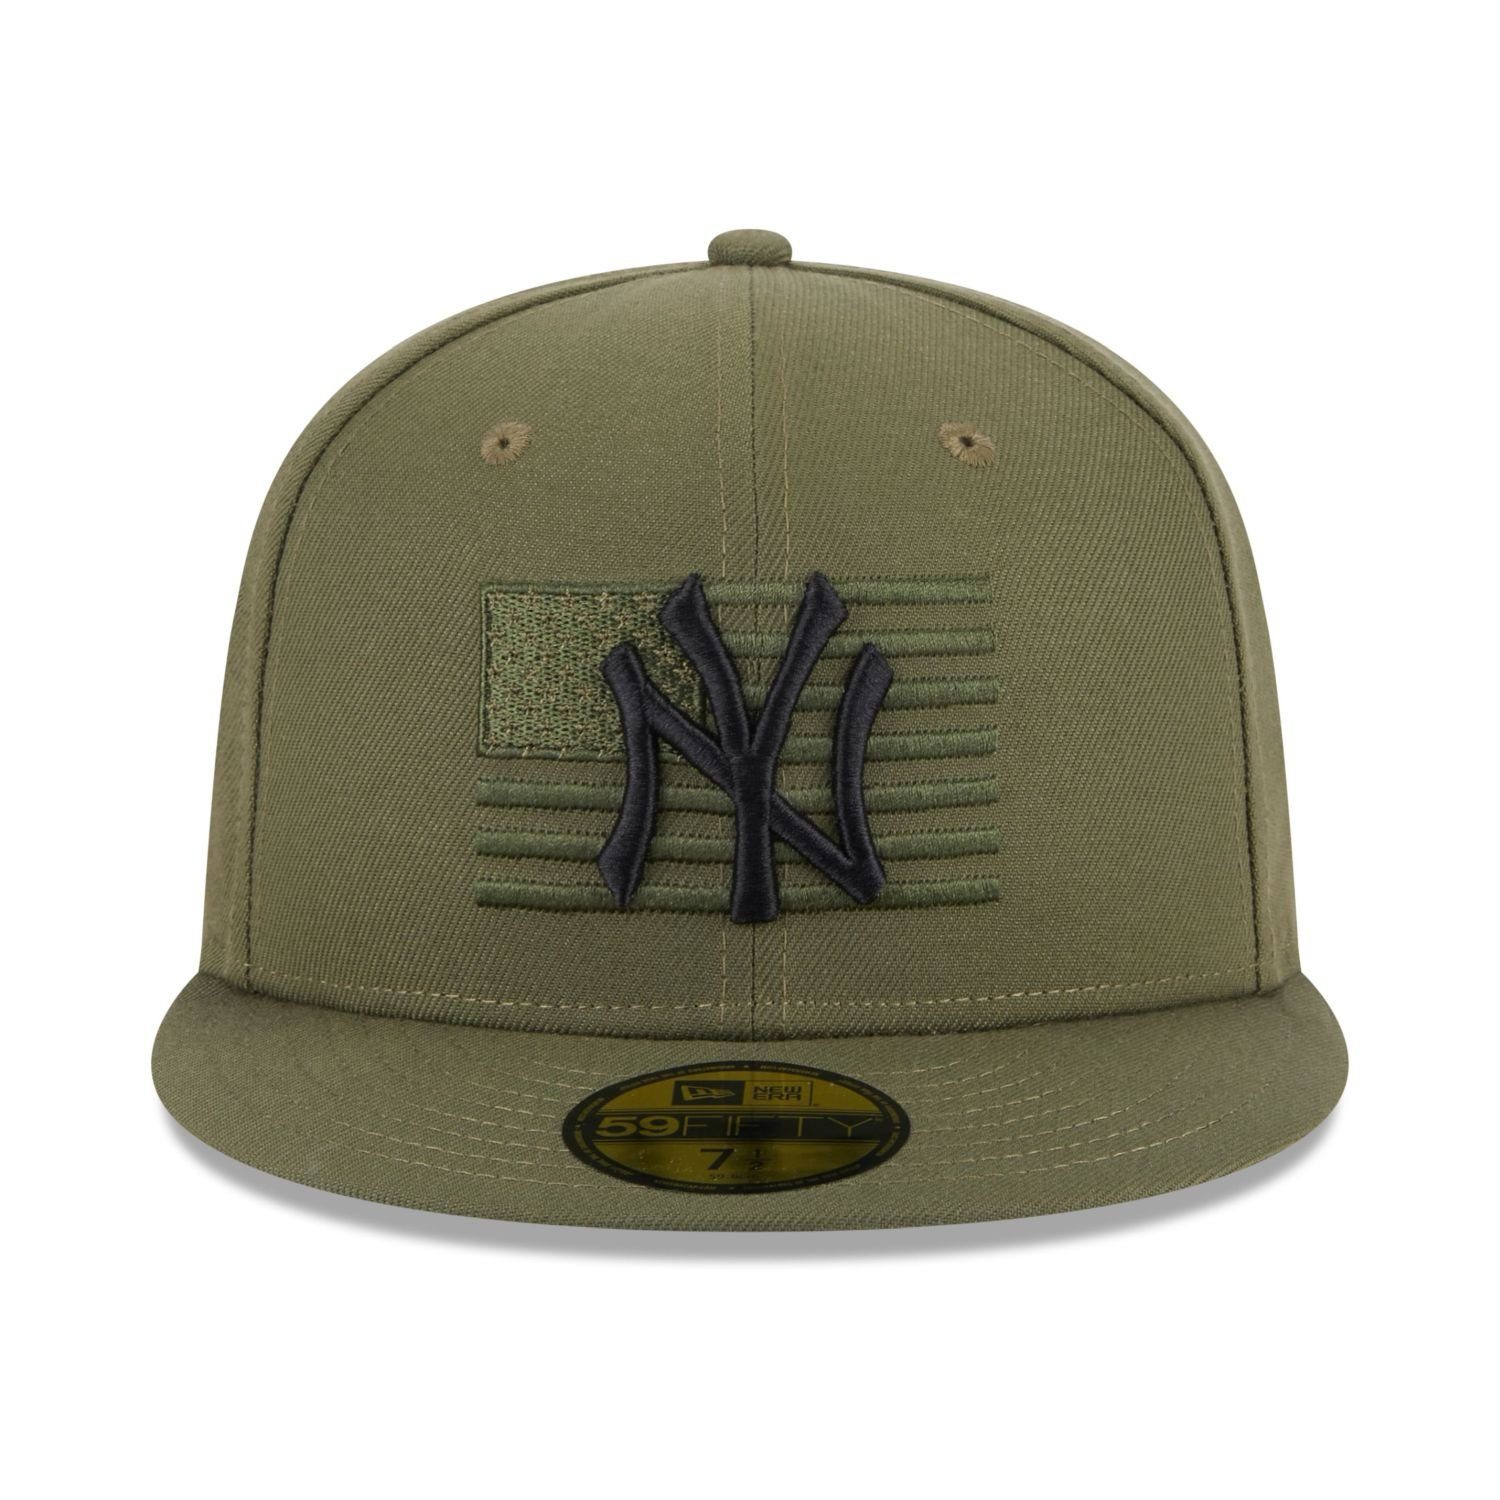 New Era New Fitted Forces Armed Yankees Cap 59Fifty York